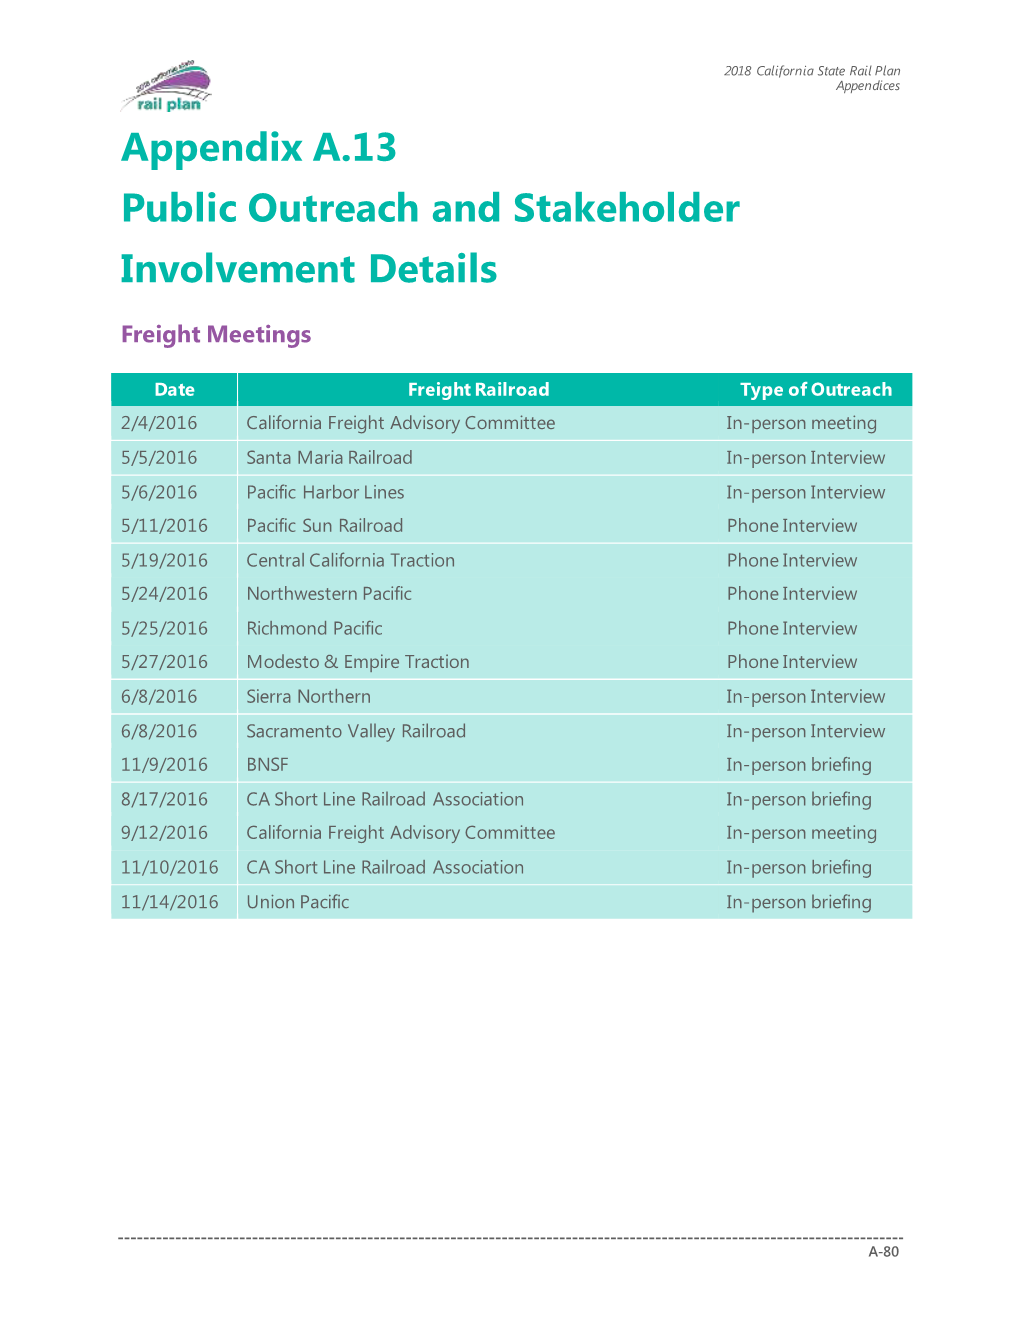 Appendix A.13 Public Outreach and Stakeholder Involvement (PDF)